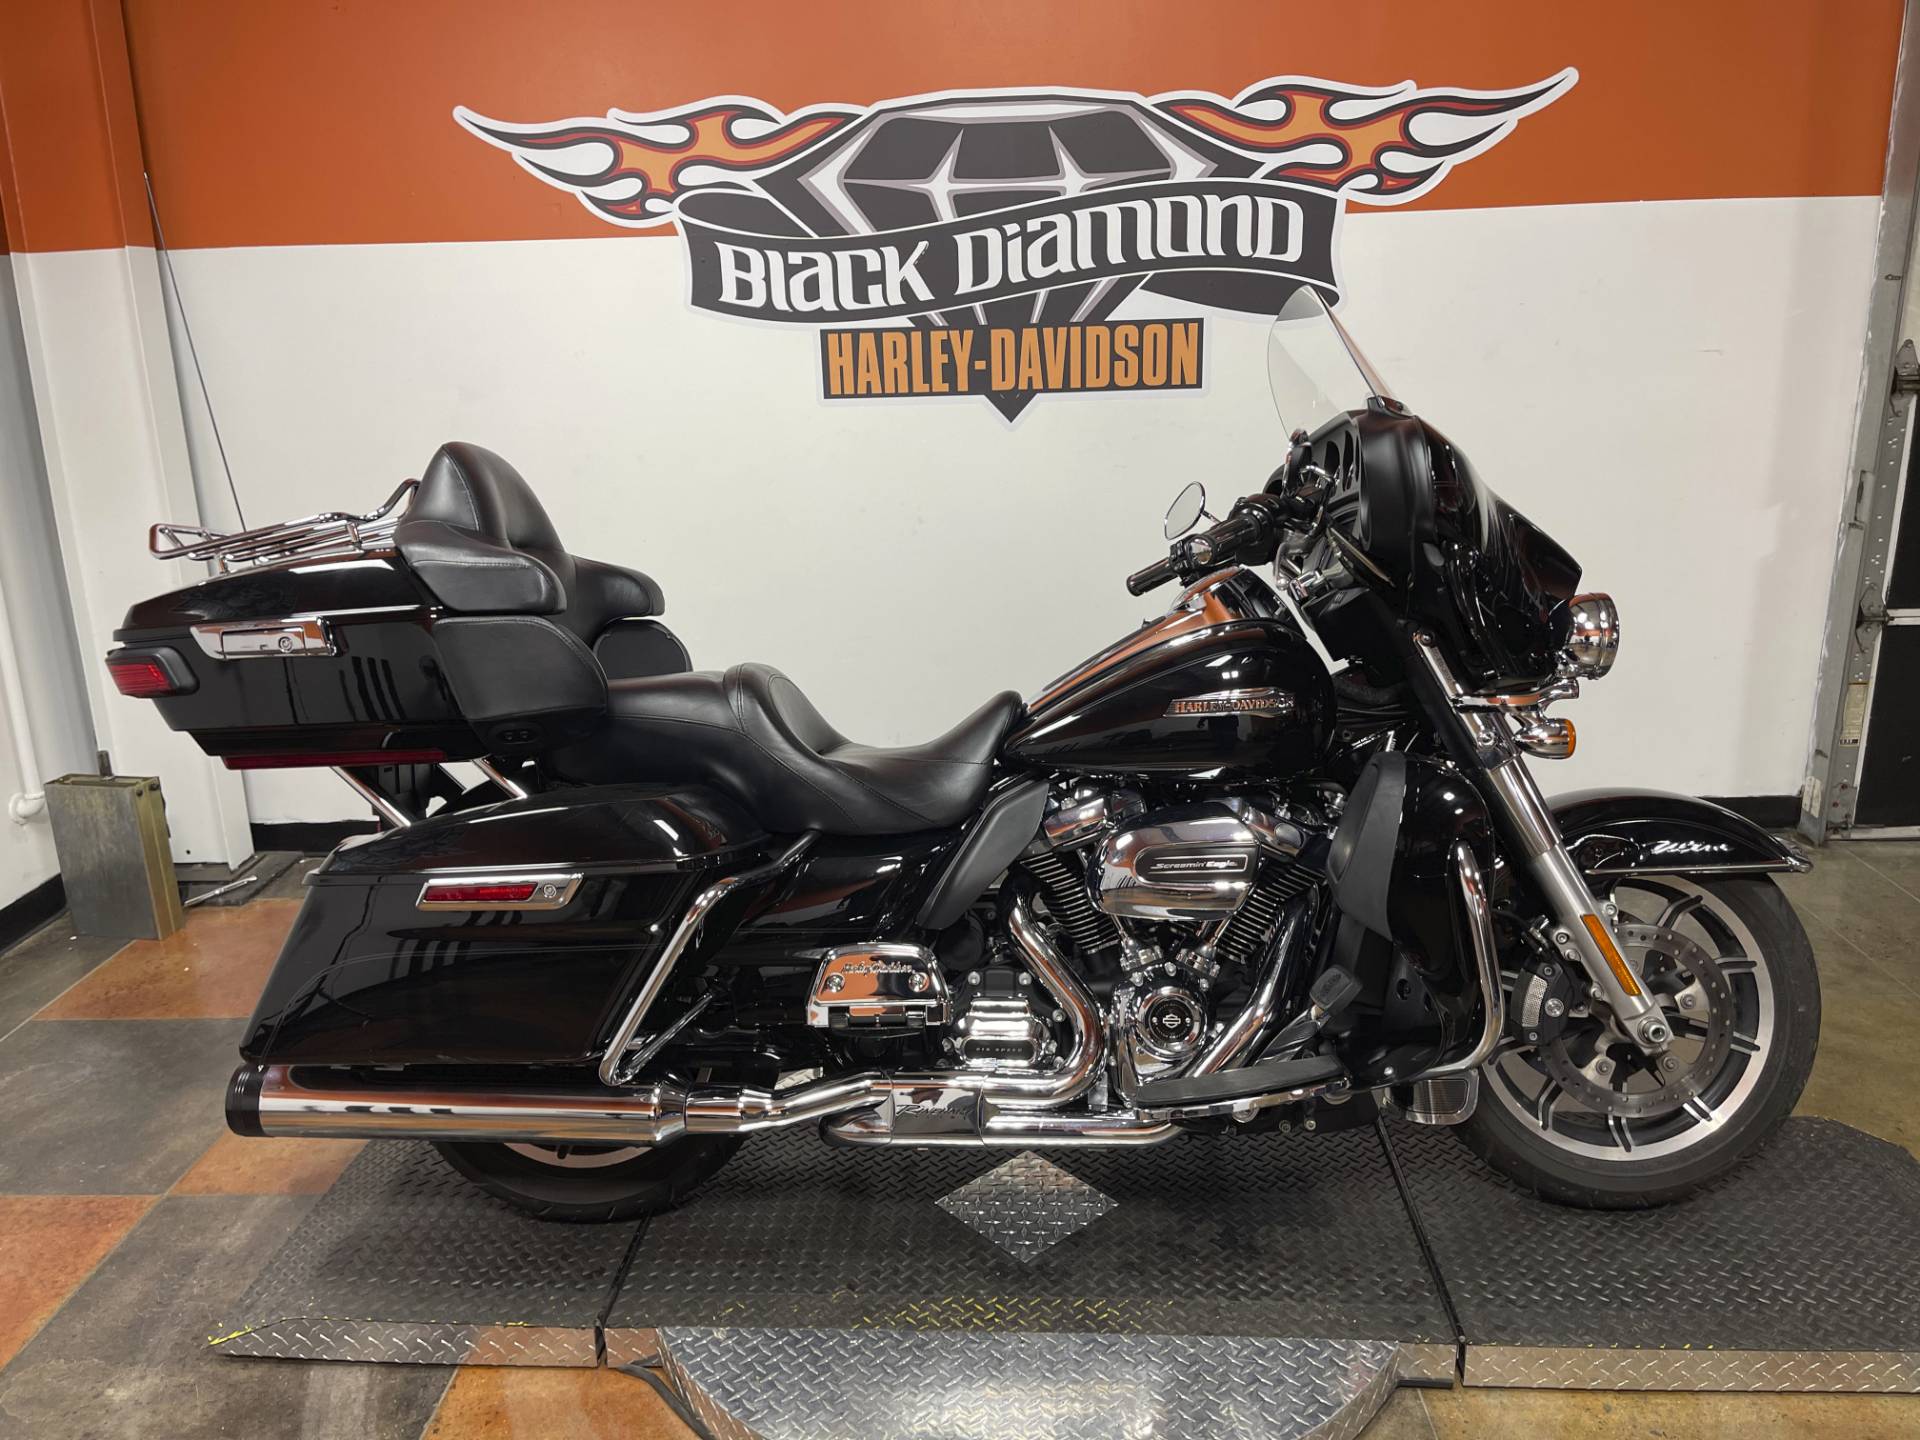 Used 2018 Harley Davidson Electra Glide Ultra Classic Vivid Black Motorcycles In Marion Il 635053